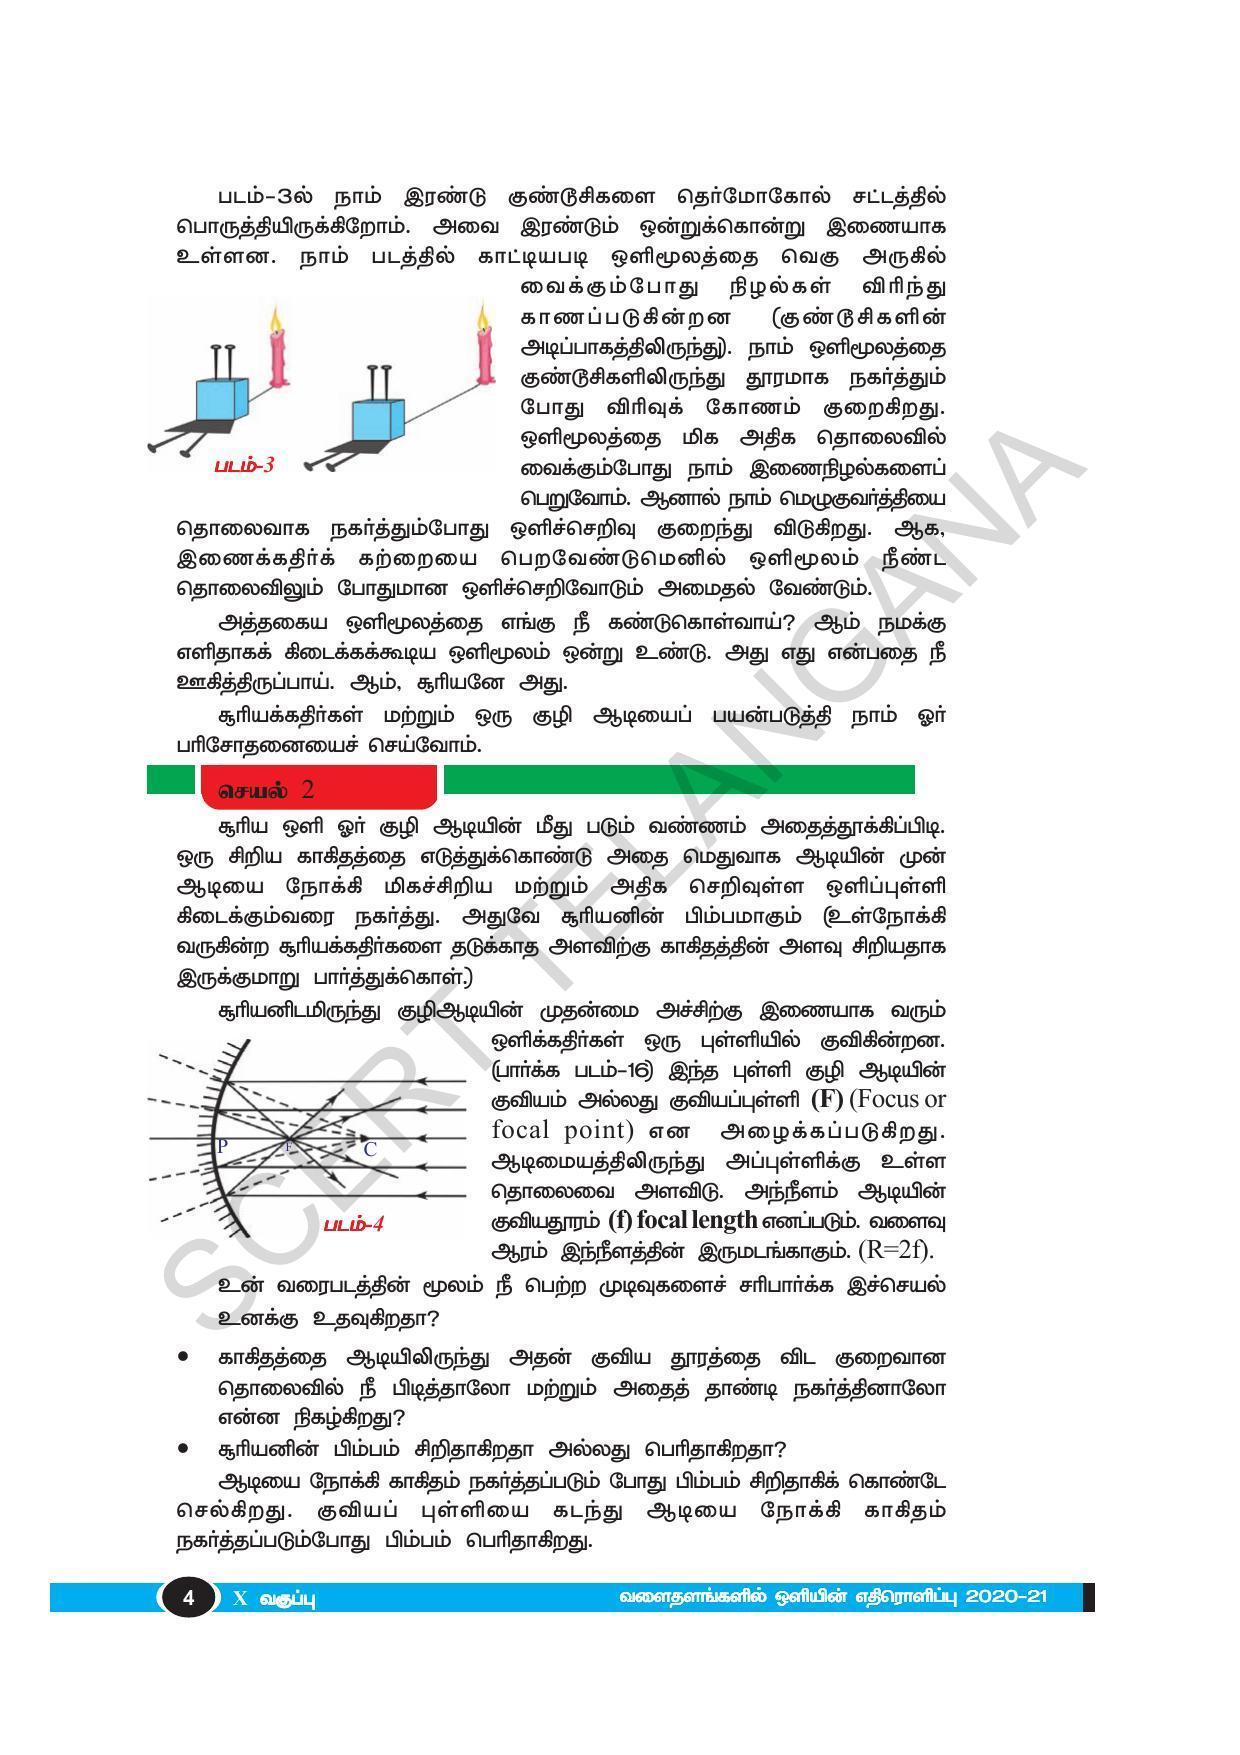 TS SCERT Class 10 Physical Science(Tamil Medium) Text Book - Page 16